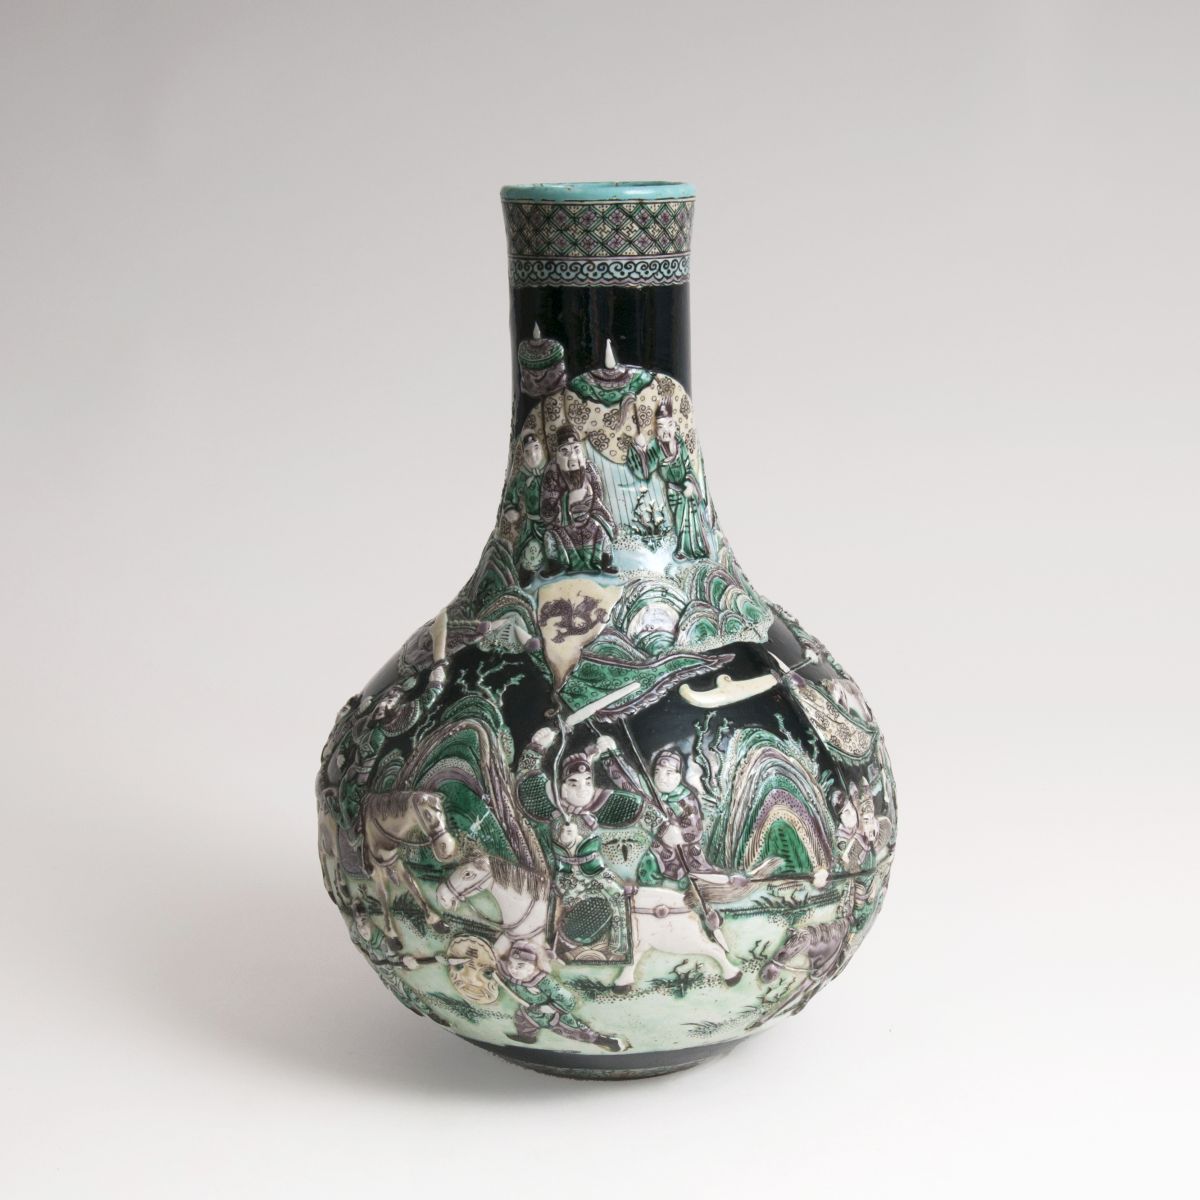 A 'Famille noire' baluster-shaped vase with relief decor